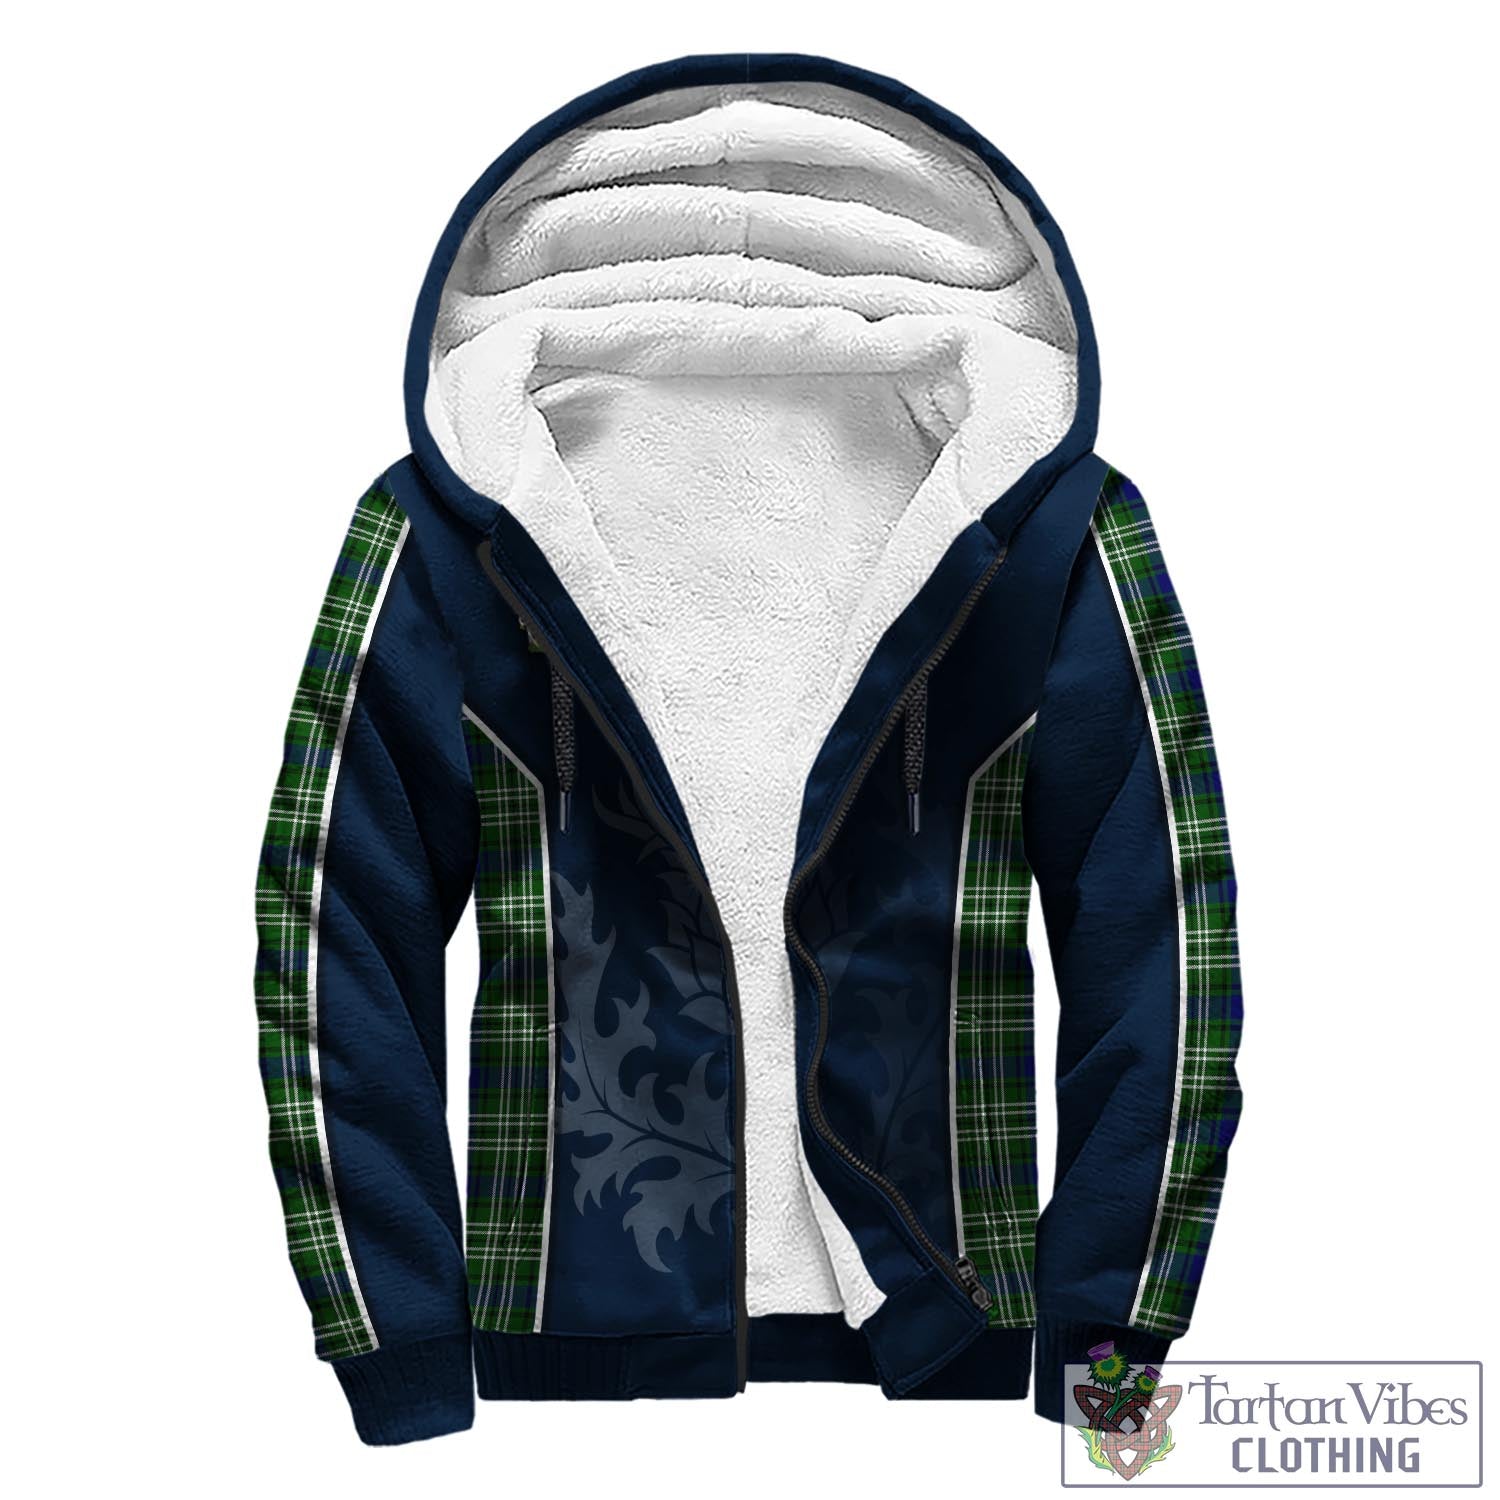 Tartan Vibes Clothing Swinton Tartan Sherpa Hoodie with Family Crest and Scottish Thistle Vibes Sport Style